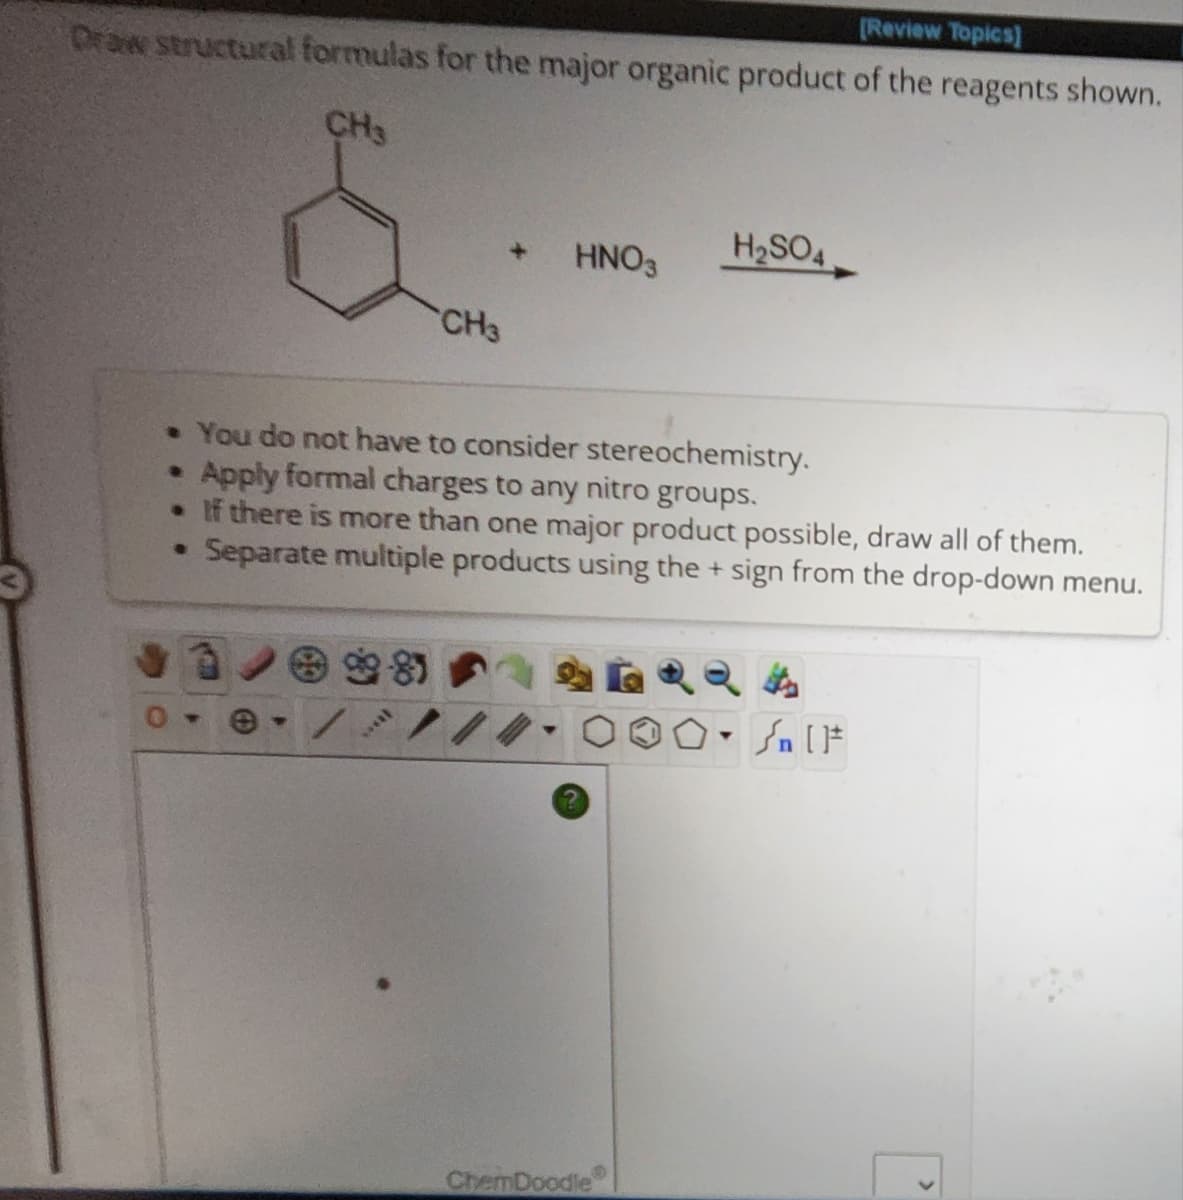 [Review Topics]
Draw structural formulas for the major organic product of the reagents shown.
CH3
CH3
HNO3
H₂SO4
• You do not have to consider stereochemistry.
Apply formal charges to any nitro groups.
• If there is more than one major product possible, draw all of them.
• Separate multiple products using the + sign from the drop-down menu.
ChemDoodle
Sn [F